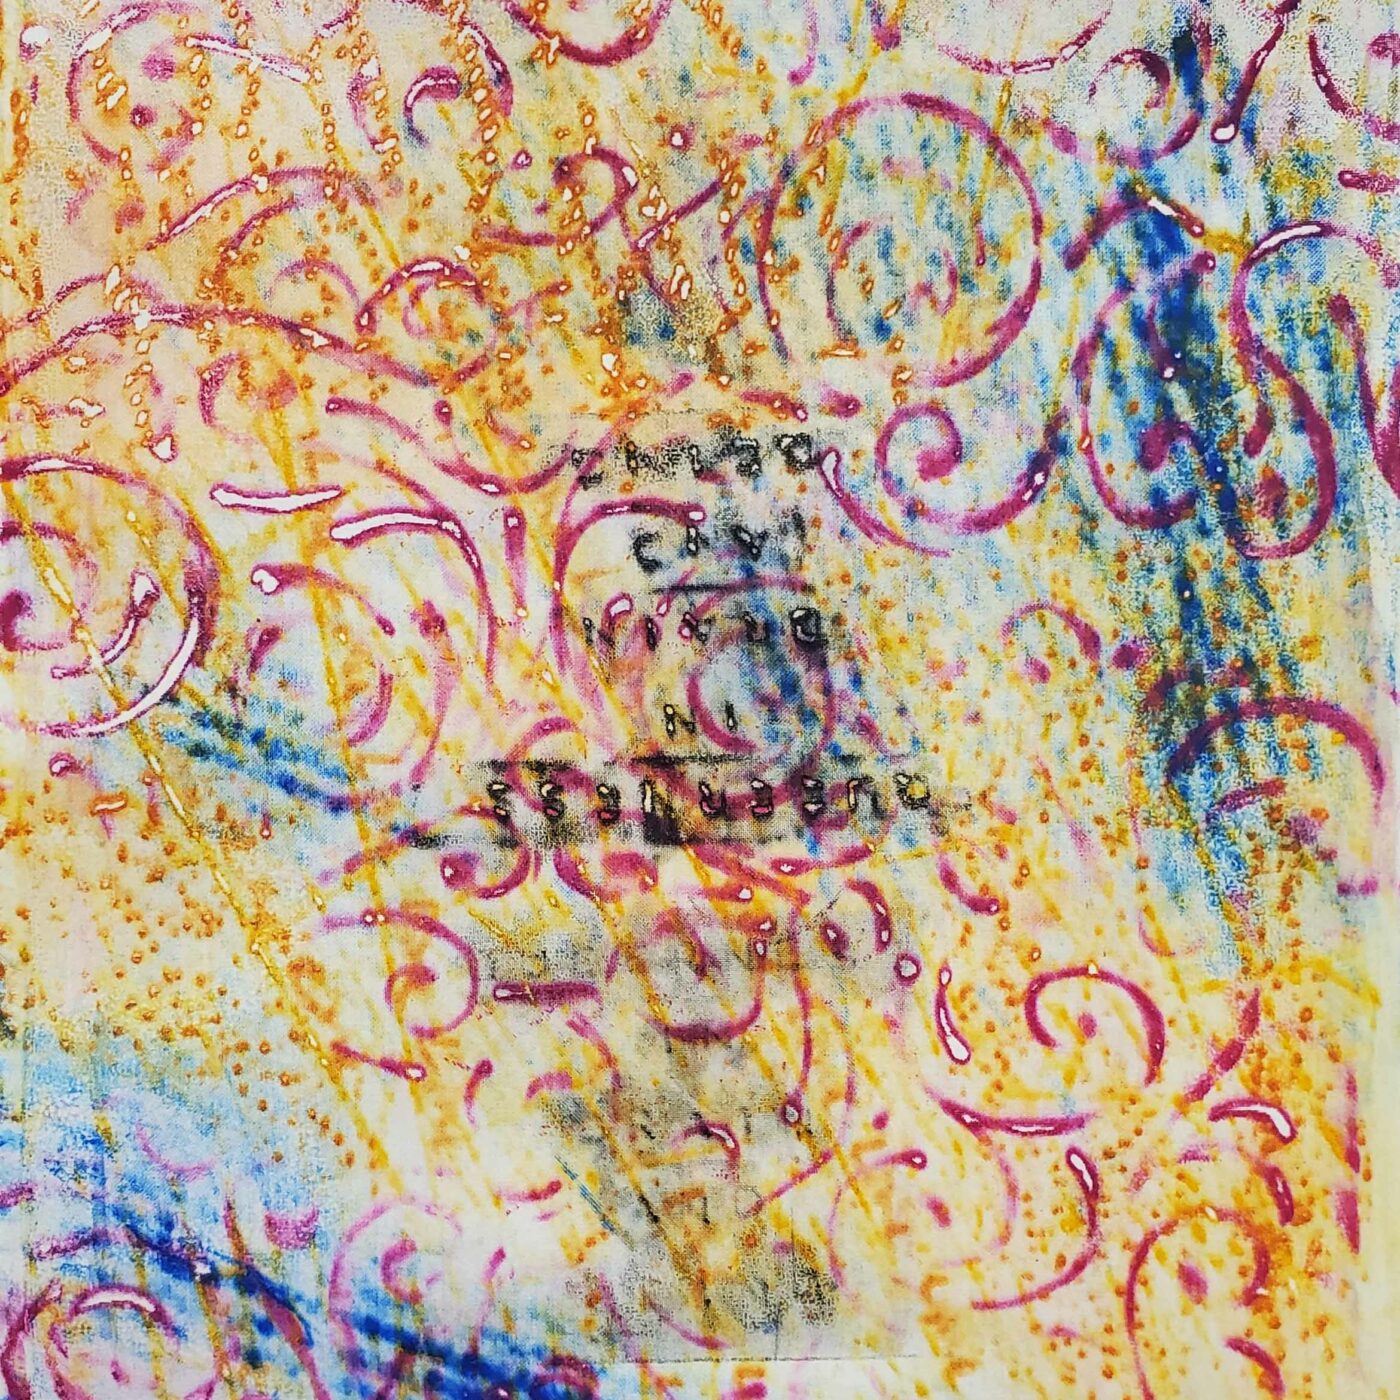 A close up of a monotype print with various textures inculding stripes and squiggles in blues, yellows, reds and greens.